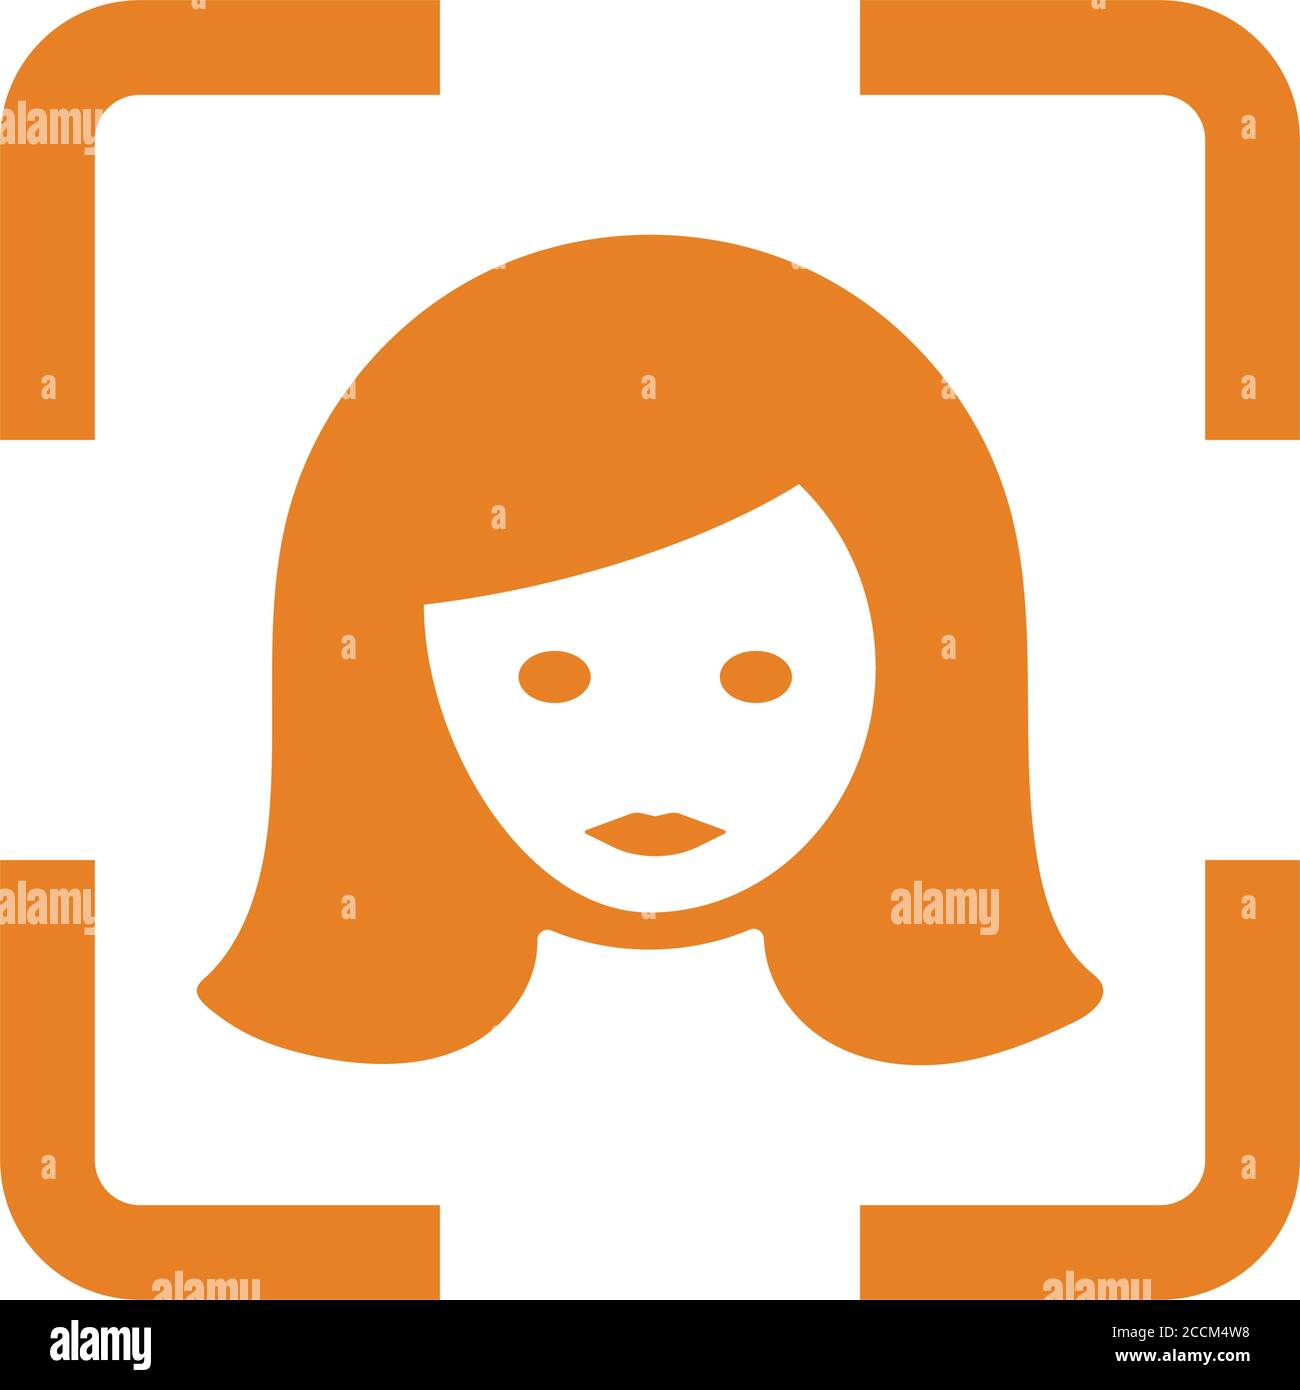 Camera, face detection icon. Beautiful design and fully editable vector for commercial use, printed files and presentations, Promotional Materials, we Stock Vector